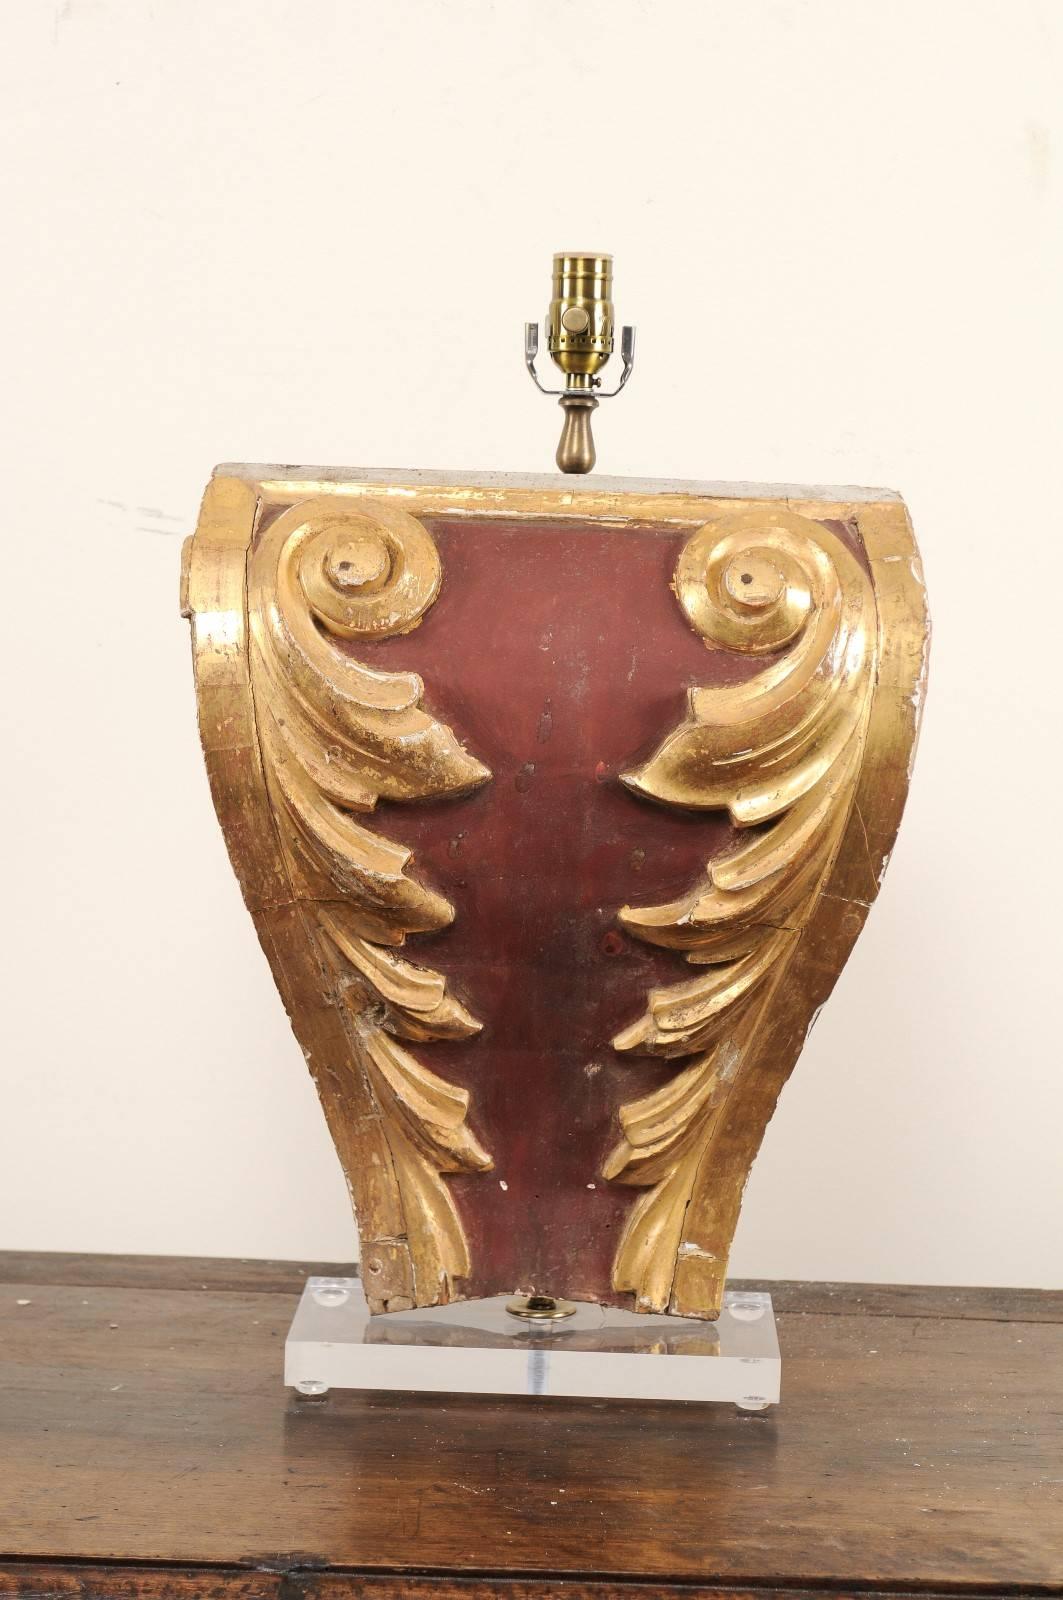 A 19th century Italian fragment table lamp. This table lamp has been fashioned from a 19th century Italian fragment mounted onto a newer Lucite base. This lamp features a beautiful fragment carved with volutes and acanthus leaves down opposing